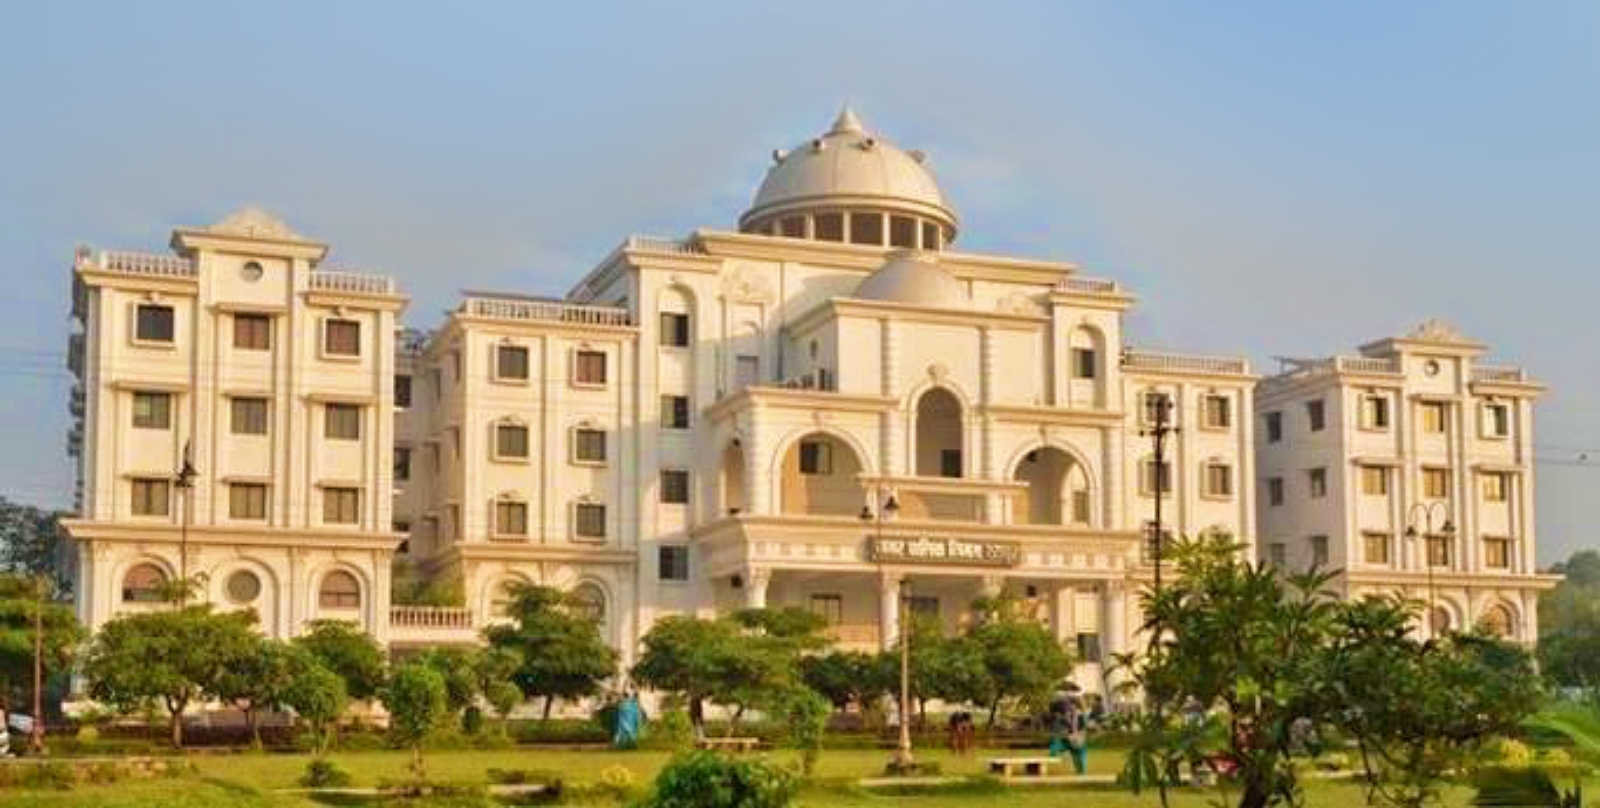 The 10 Best Things To Do in Raipur